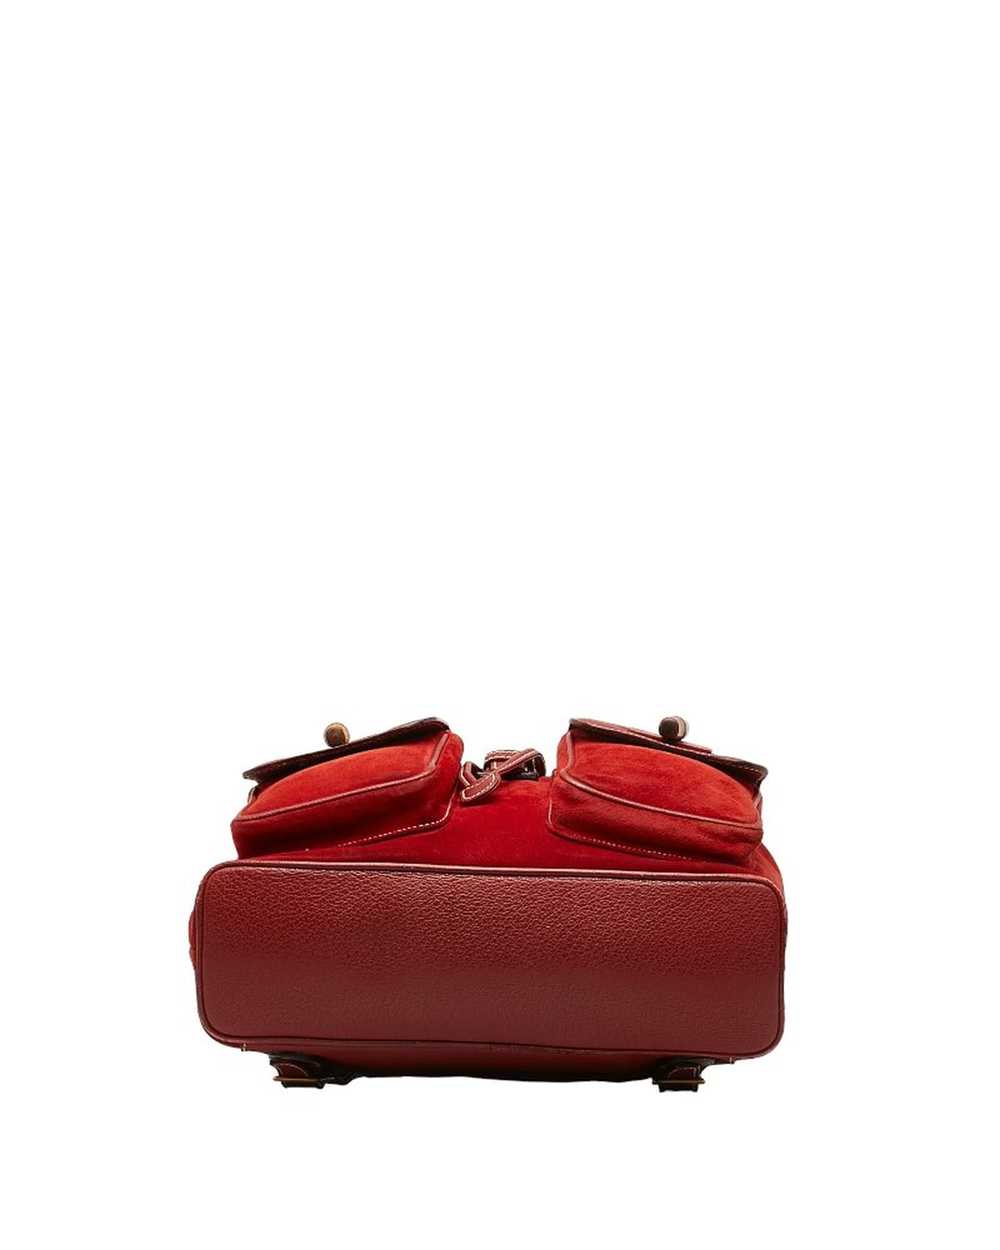 Gucci Red Suede Bamboo Backpack Bag - image 4